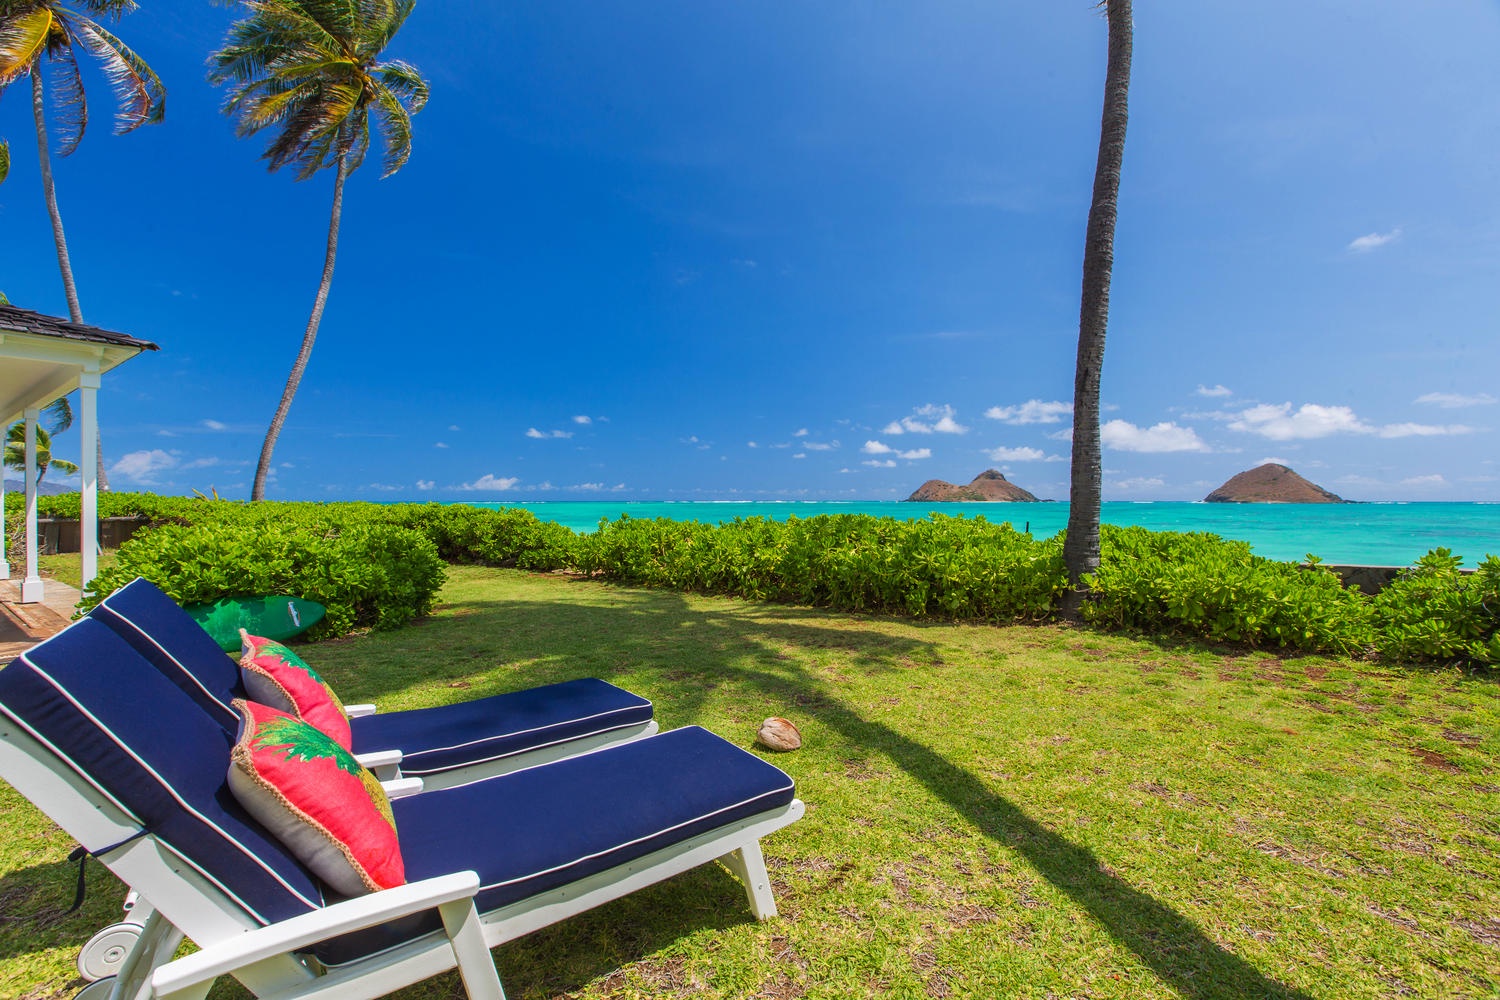 Kailua Vacation Rentals, Lanikai Oceanside 5 Bedroom - Chaise lounge chairs in back yard with views of the Molulua Islands